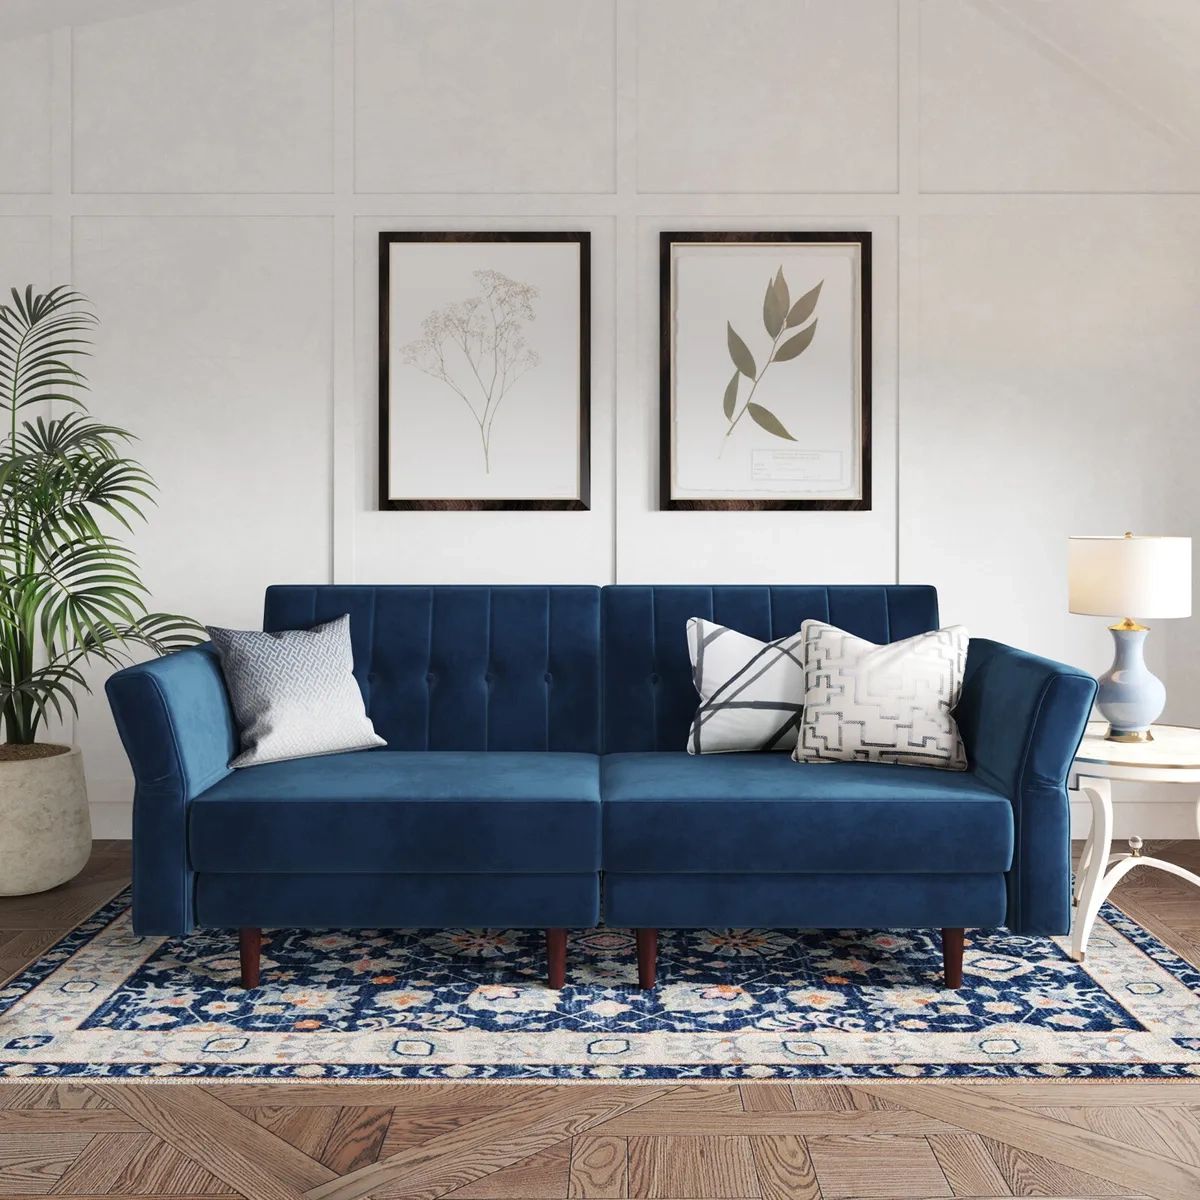 Velvet Convertible Futon Sofa Bed Memory Foam Futon Couch Sleeper Sofa Blue  | Ebay With Navy Sleeper Sofa Couches (View 7 of 15)